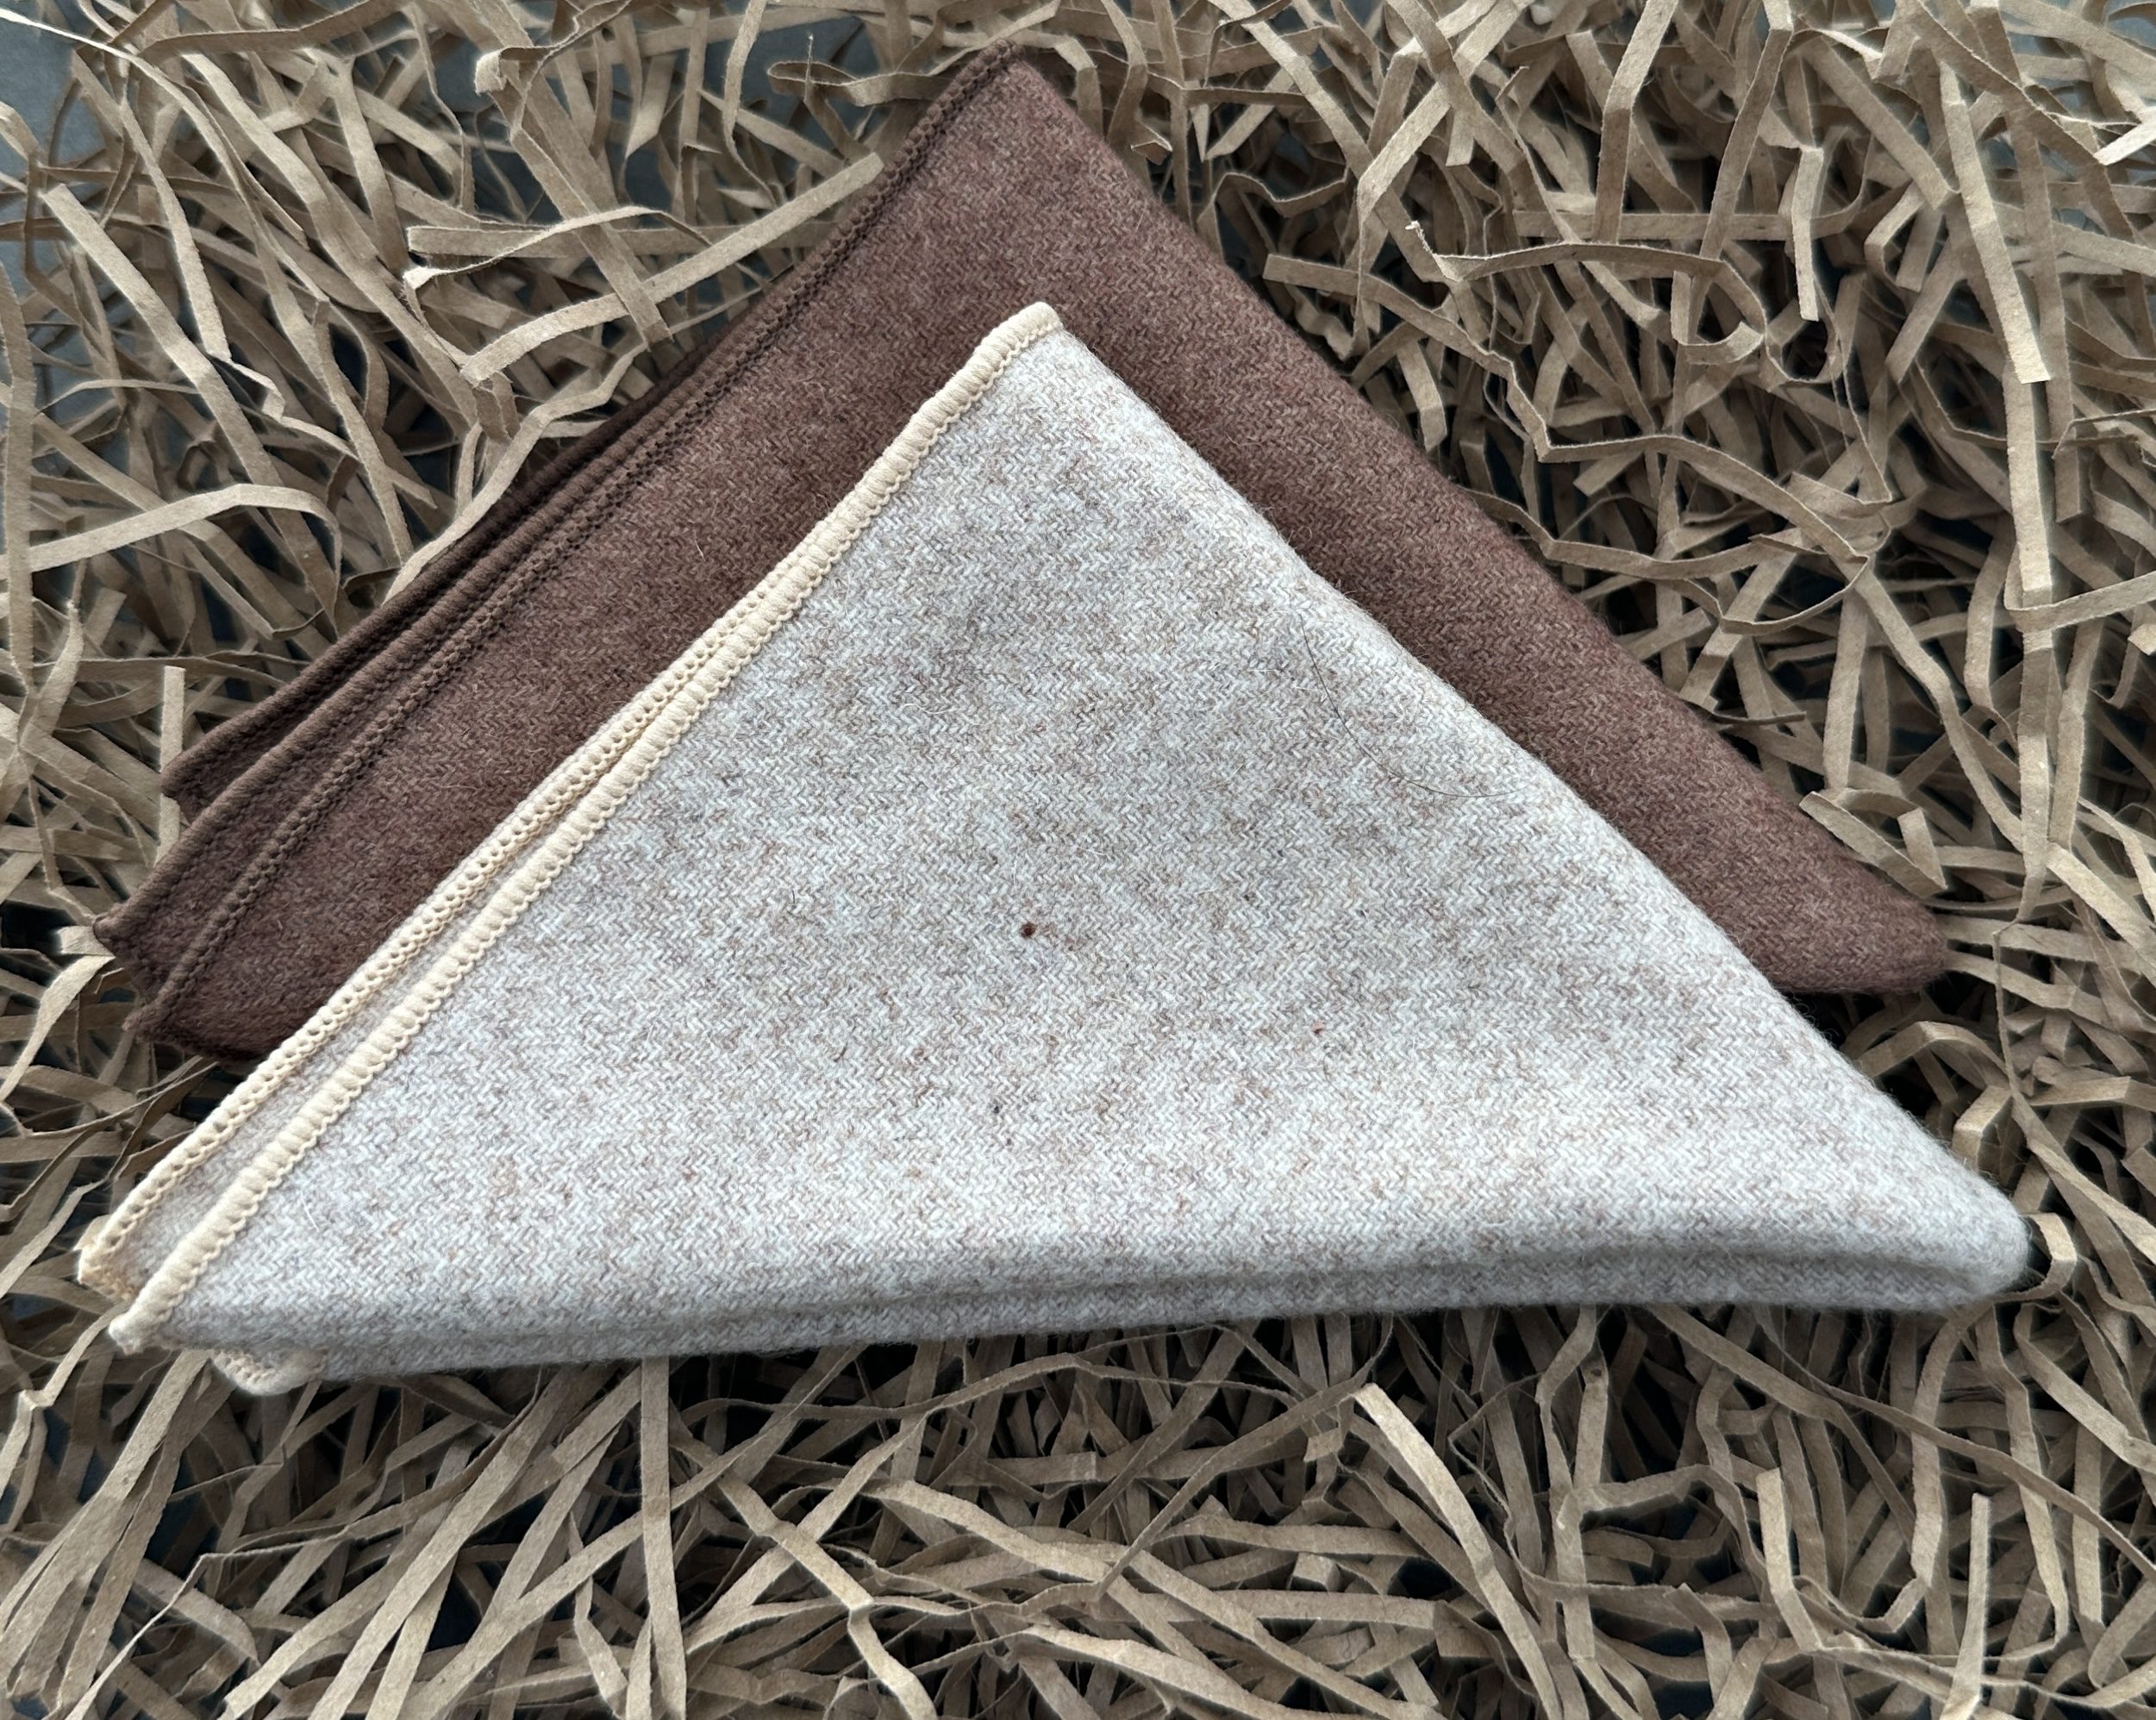 A set of two mens pocket squares in brown and cream wool for mens gifts, unique groomsmen gifts, mens wedding attire and mens valentines gifts.